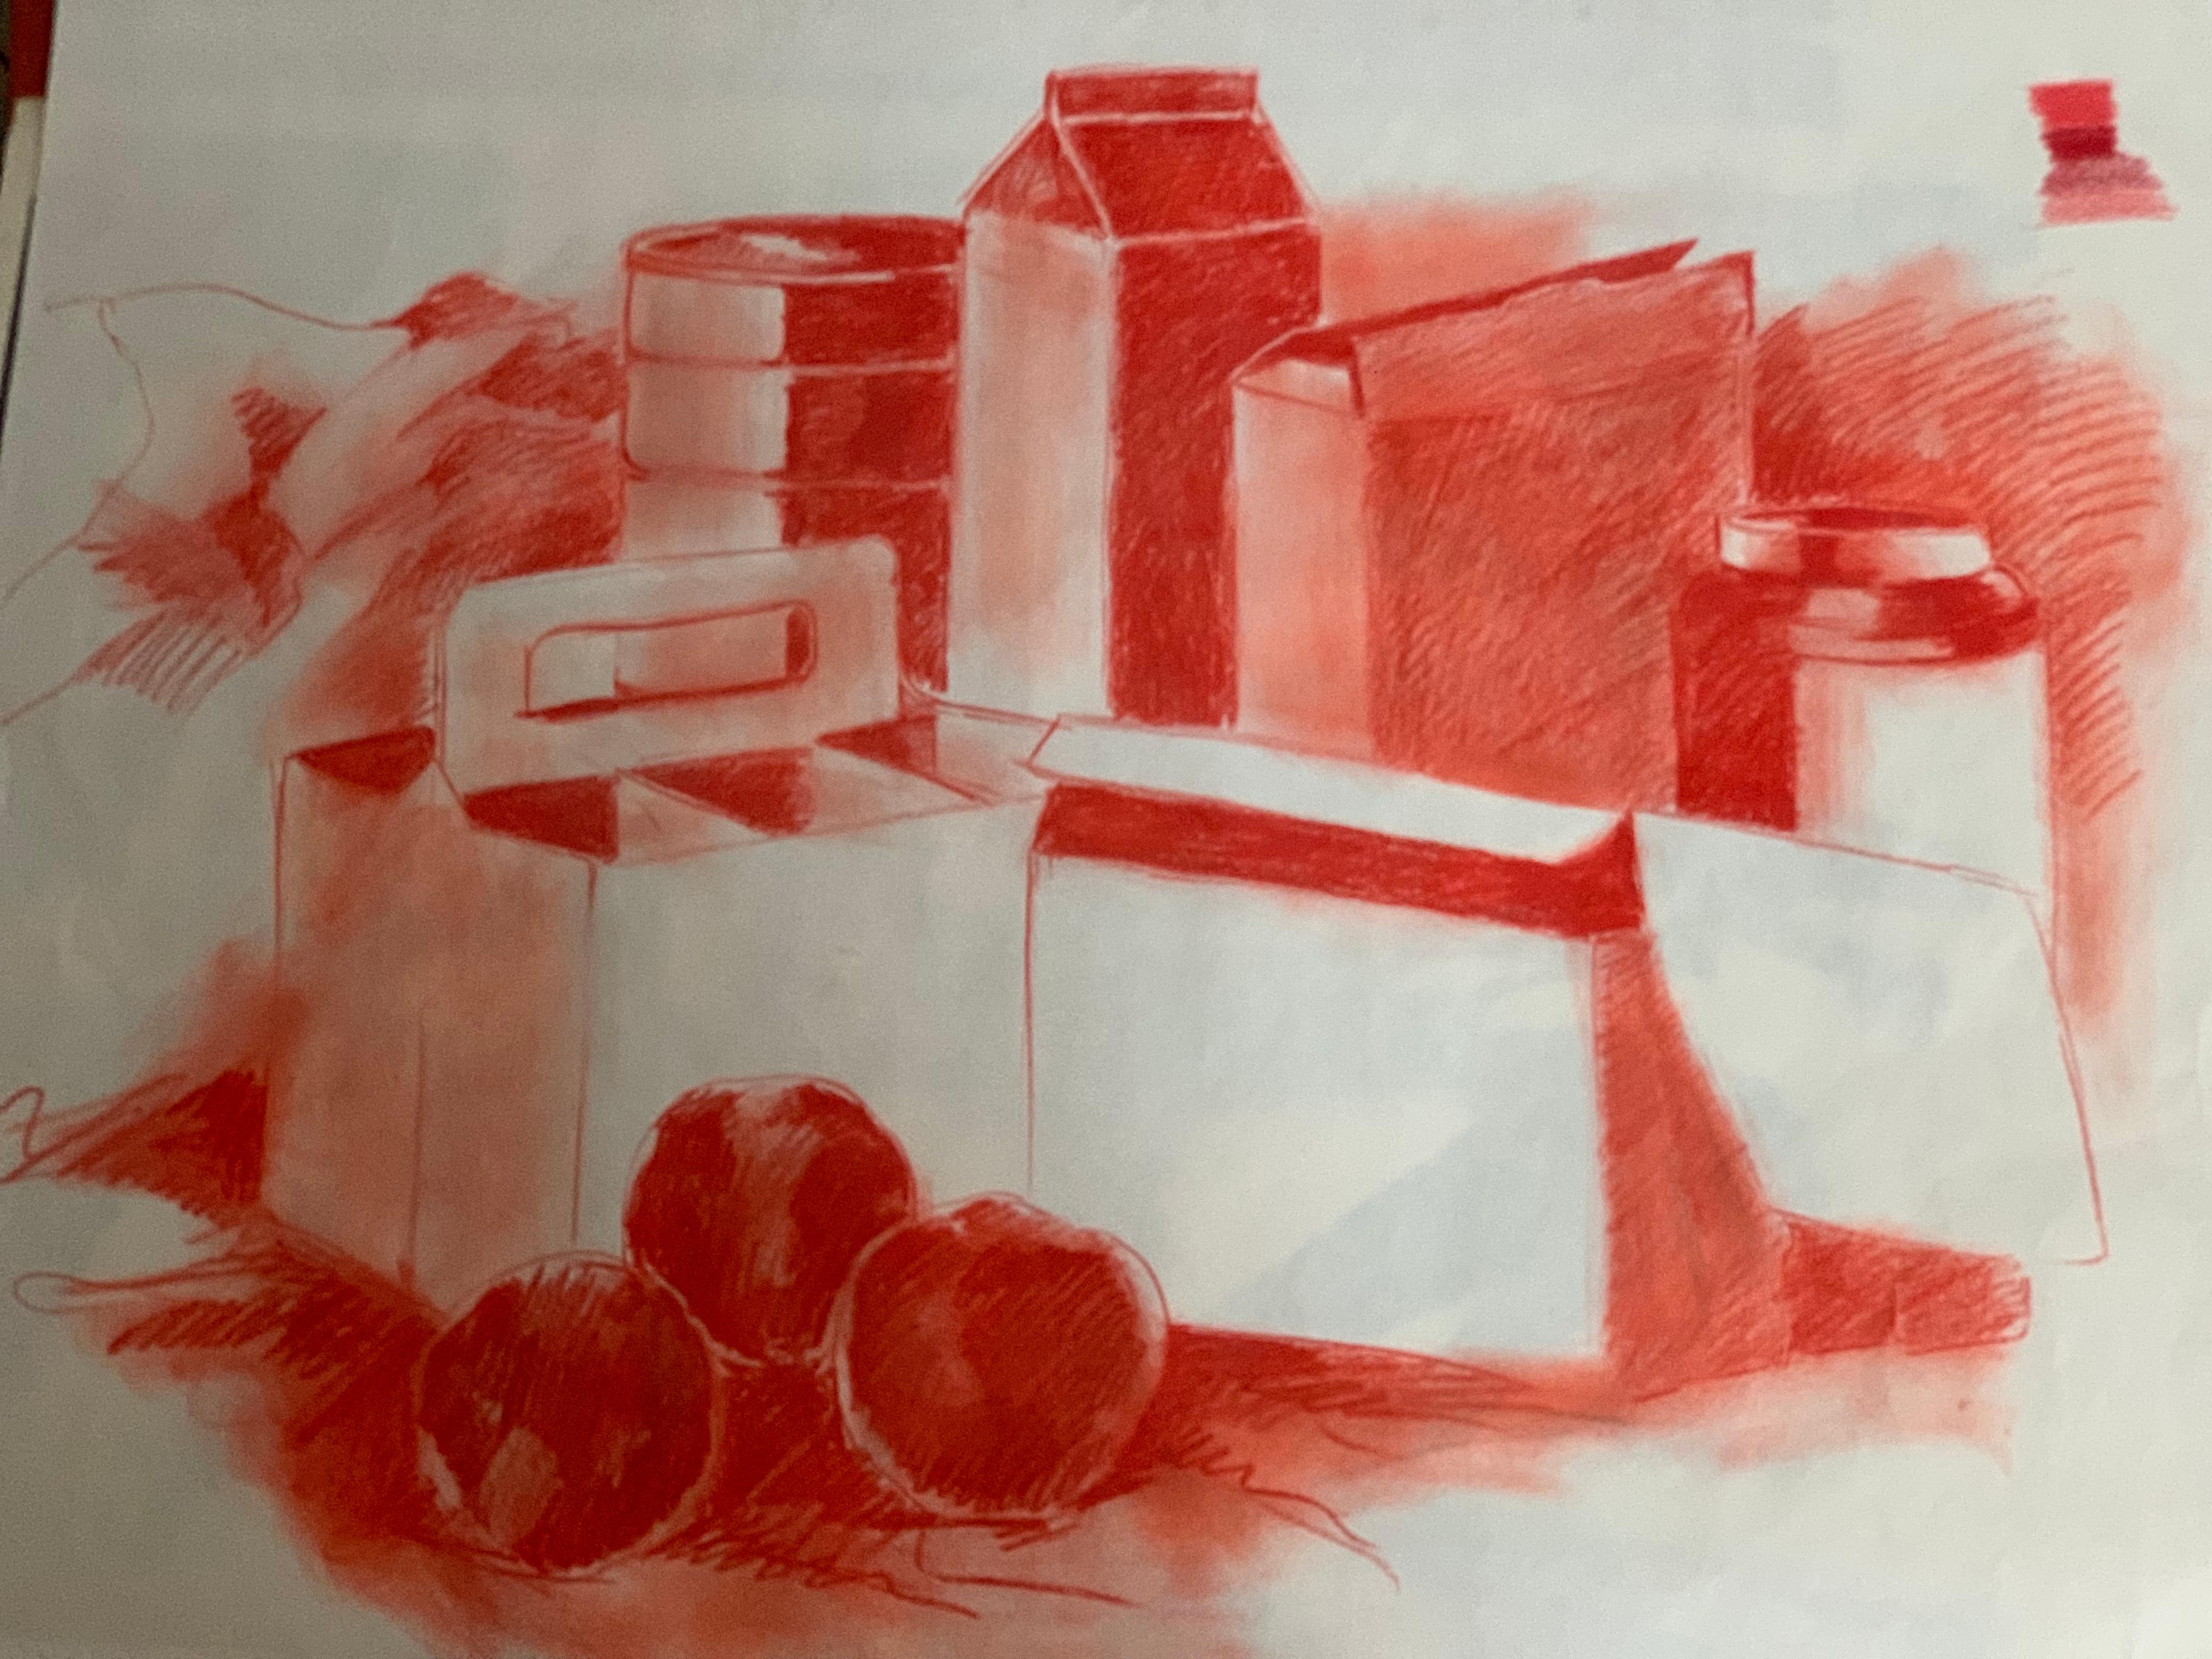 American Mid-century Pop Art Red Still Life Drawing Sketch by Salvatore Grippi, 1960s Mod For Sale